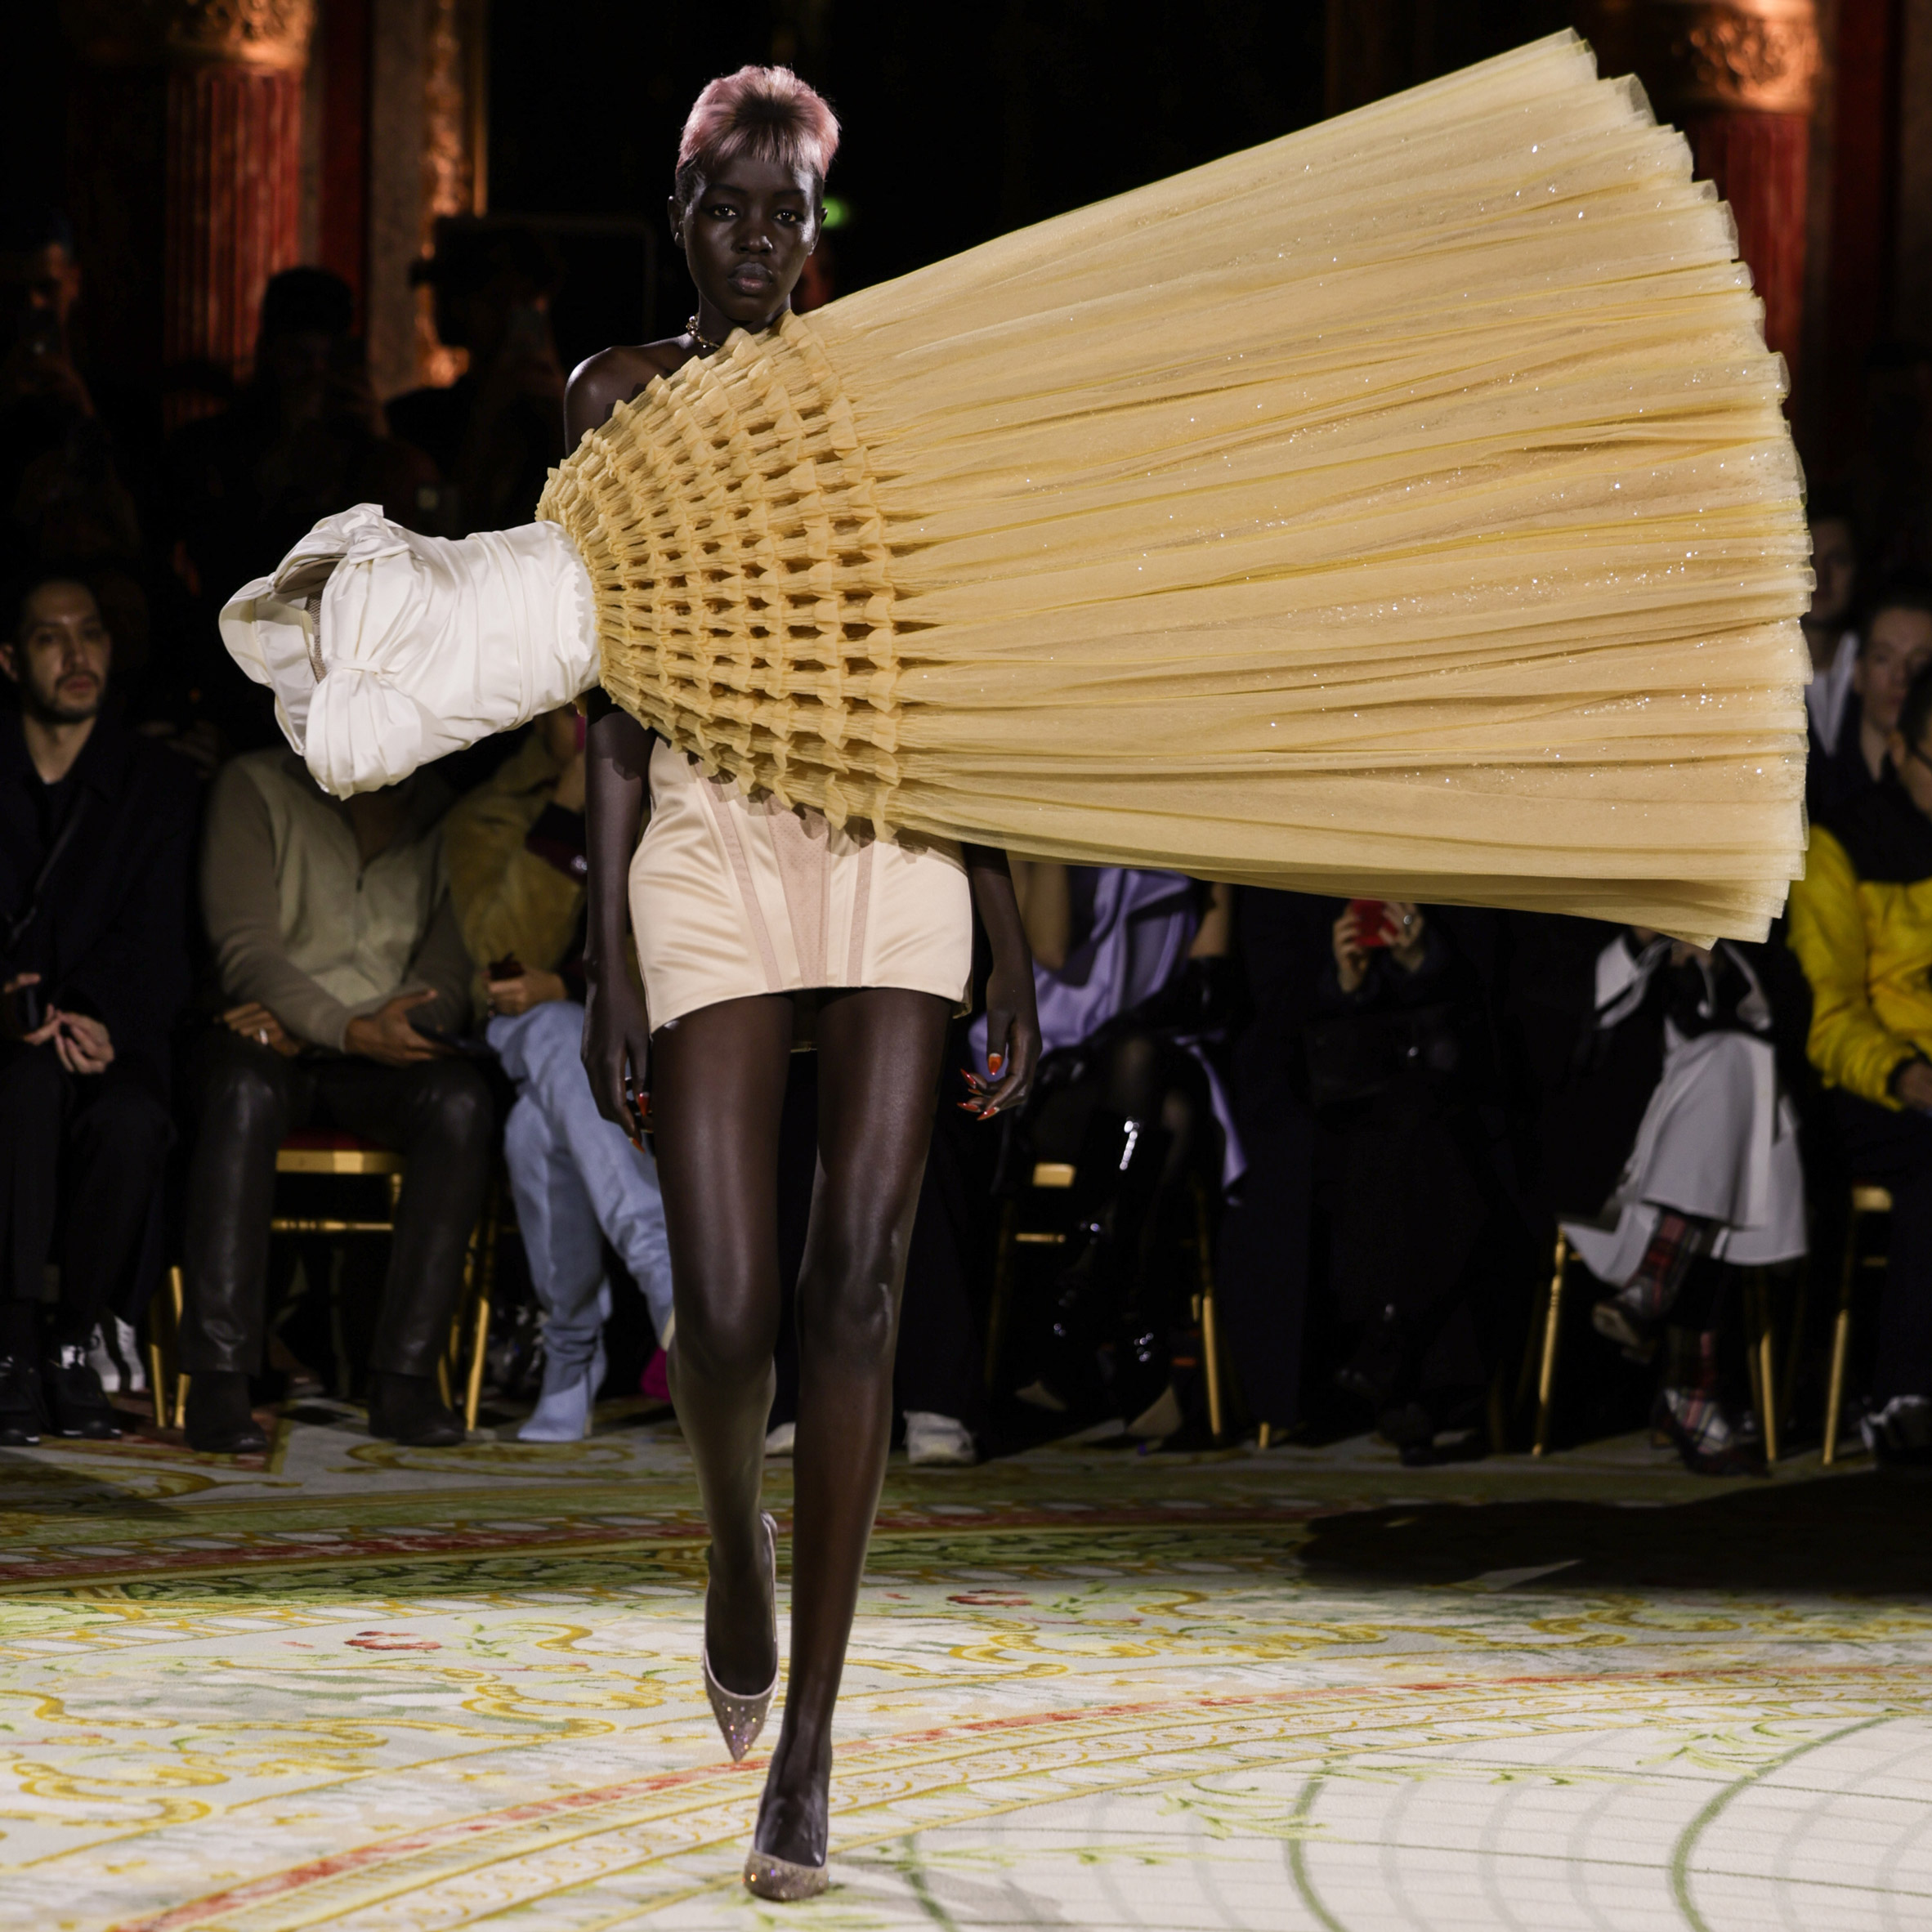 Tulle dress in Viktor & Rolf's Spring Summer 23 couture show